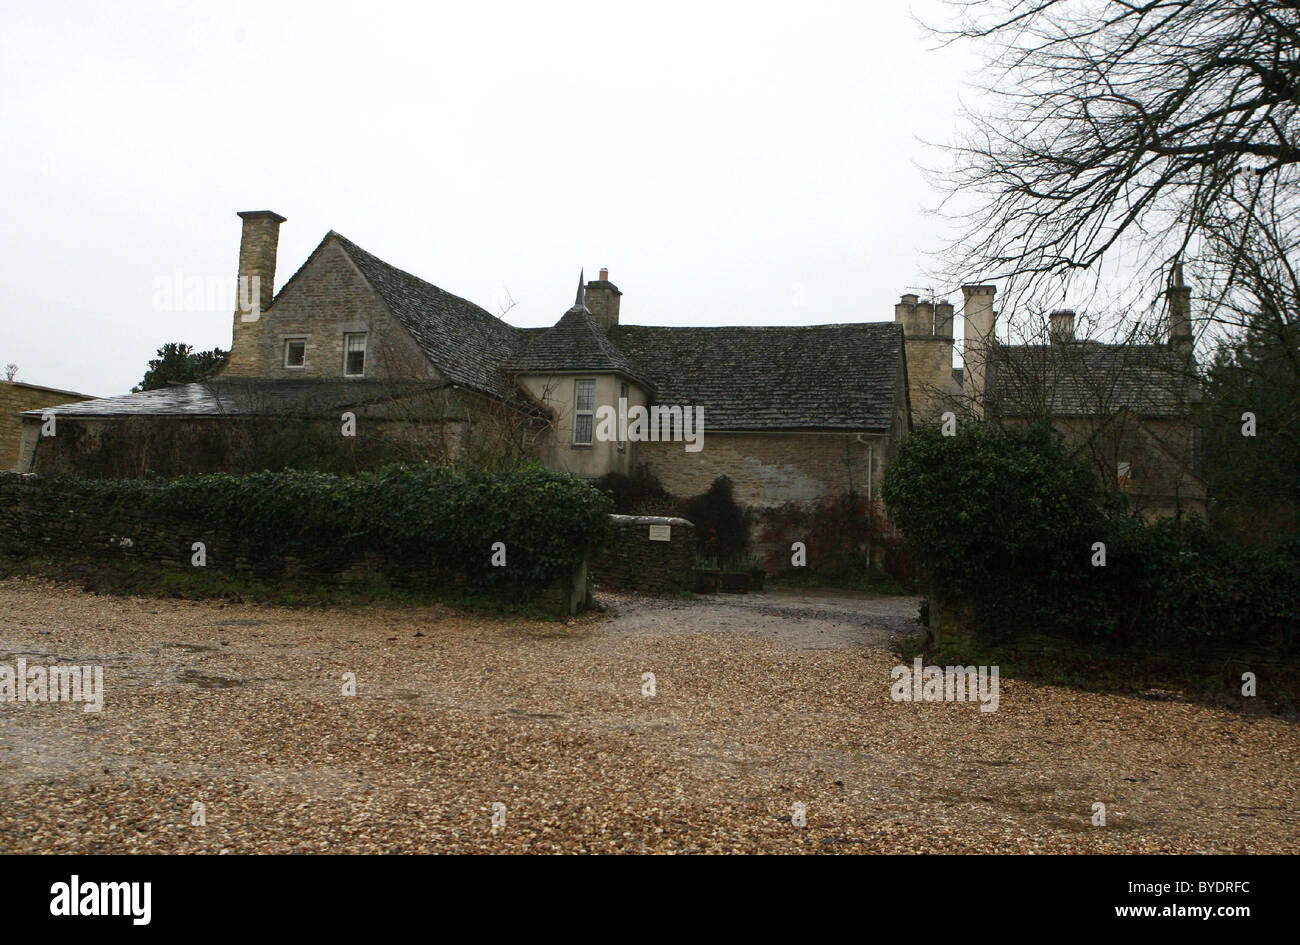 Barnsley House, the venue where Elizabeth Hurley and Arun Nayar are due to marry on 3rd March 2007 Cirencester, Stock Photo